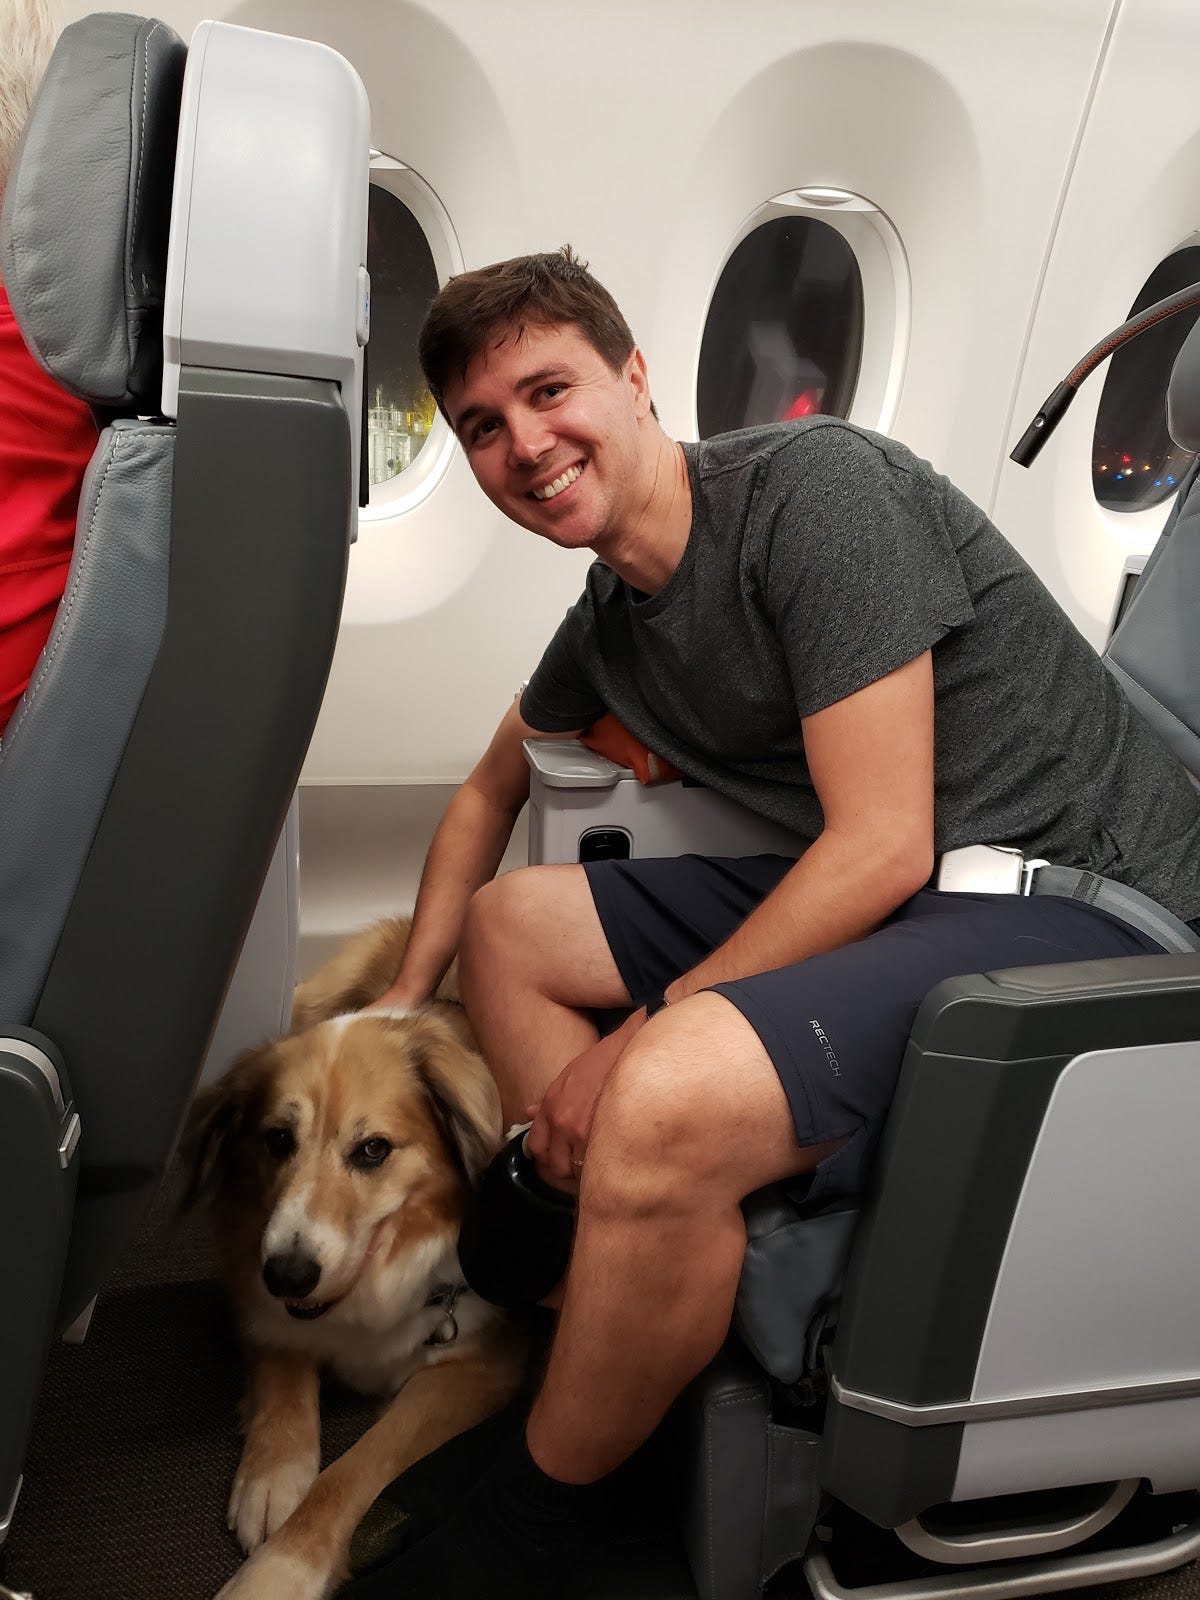 can you ship a dog on a plane